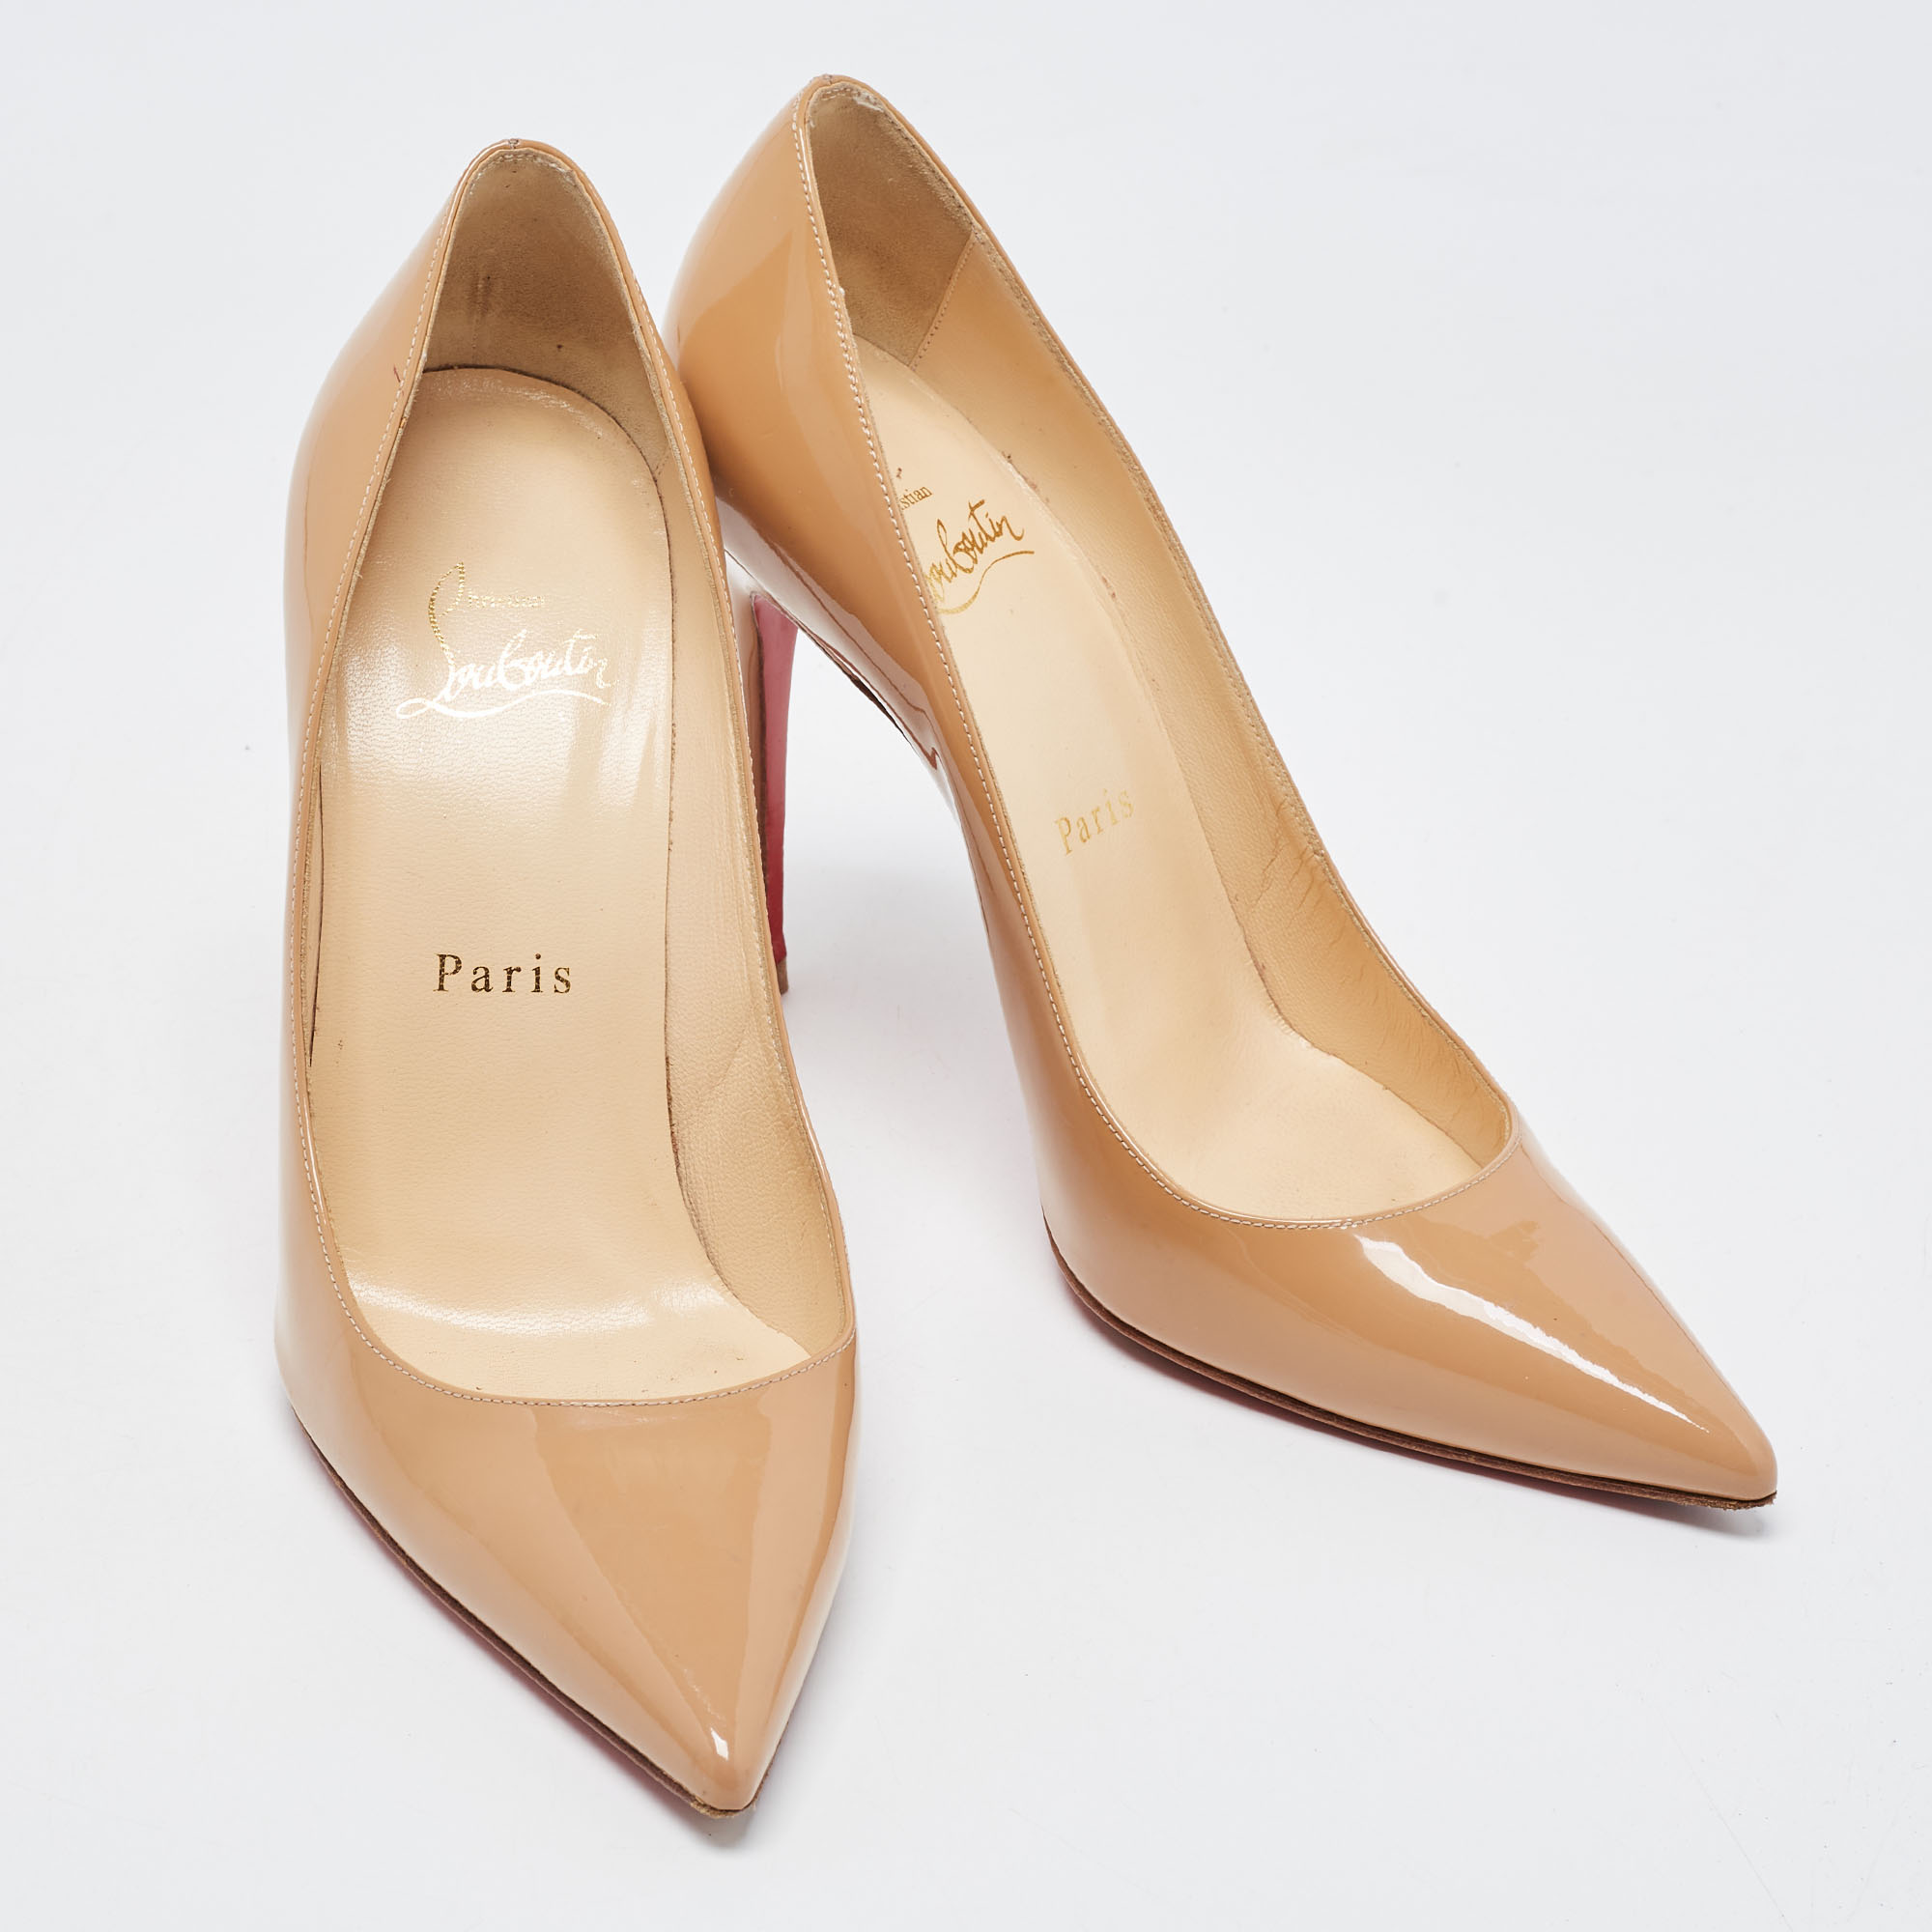 Christian Louboutin Beige Patent Leather Kate Pumps Size 37